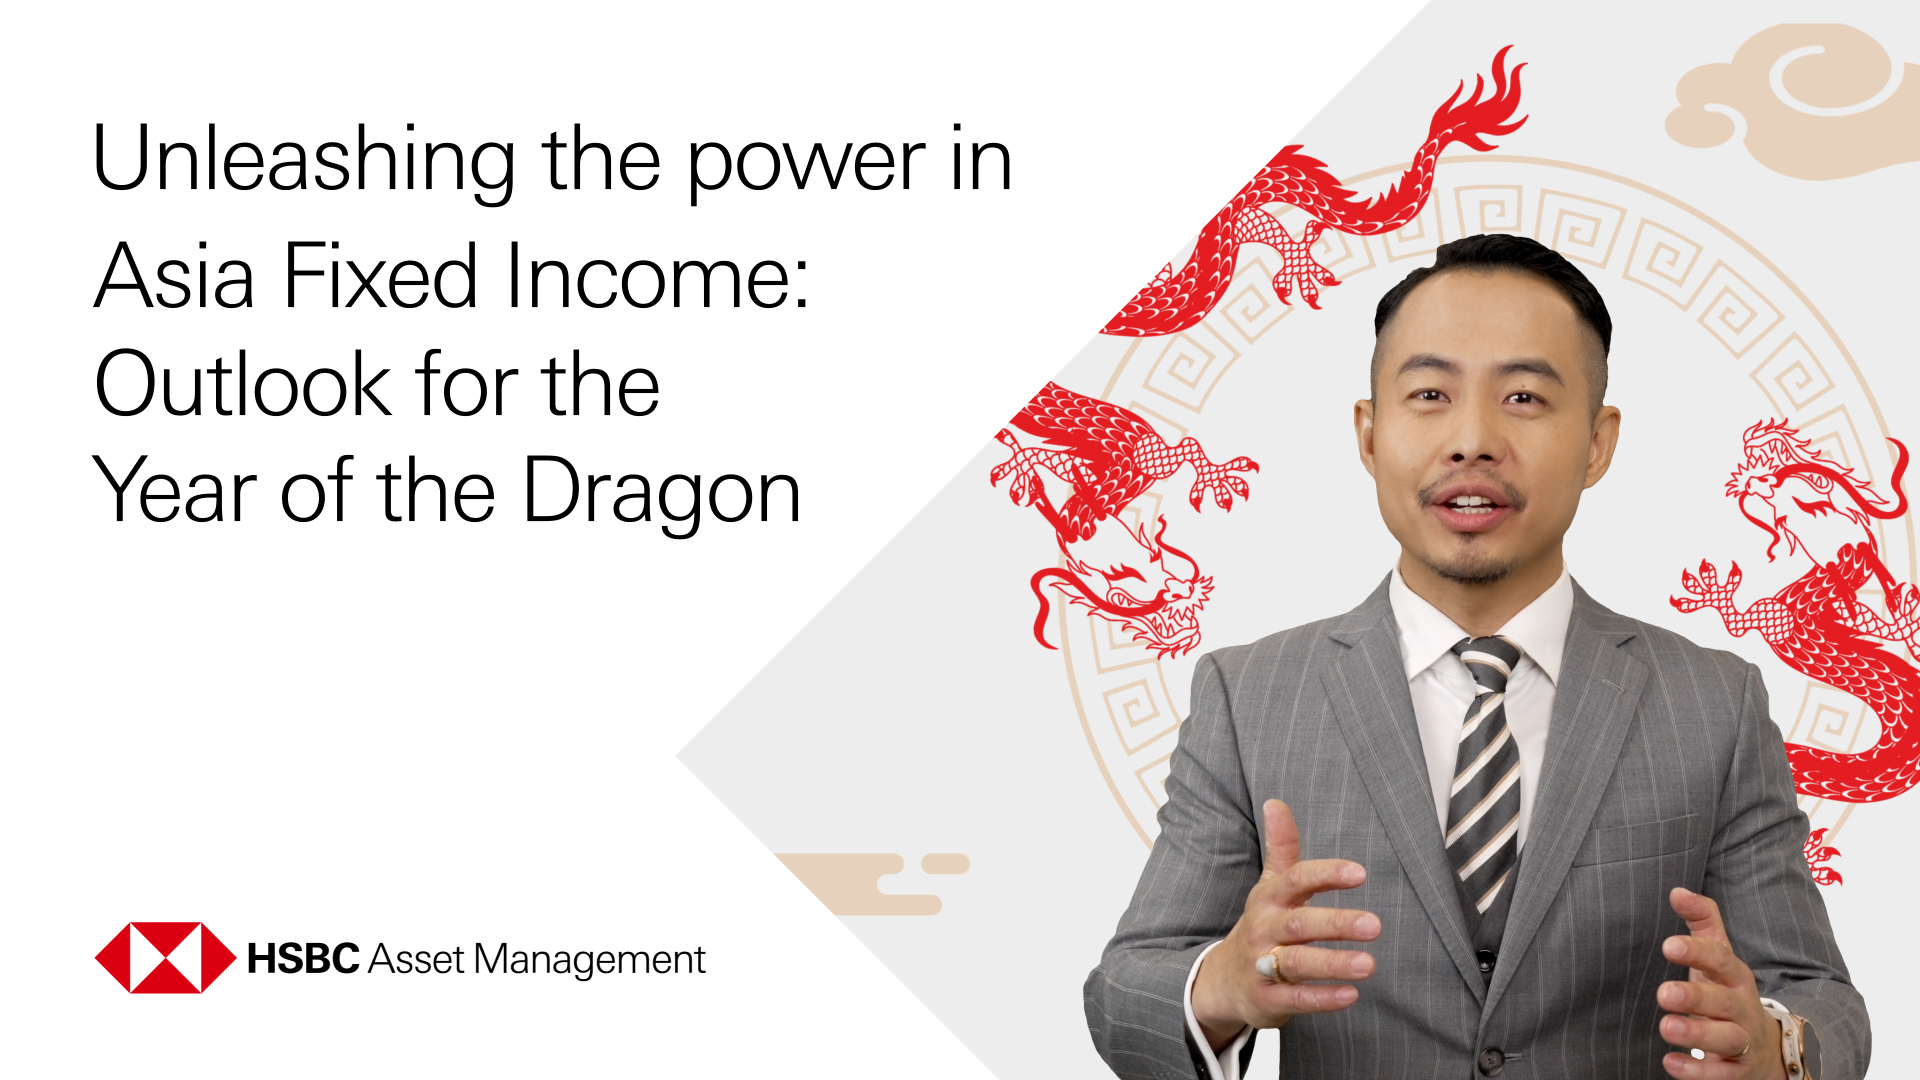 Unleashing the power in Asia Fixed Income: Outlook for the Year of the Dragon